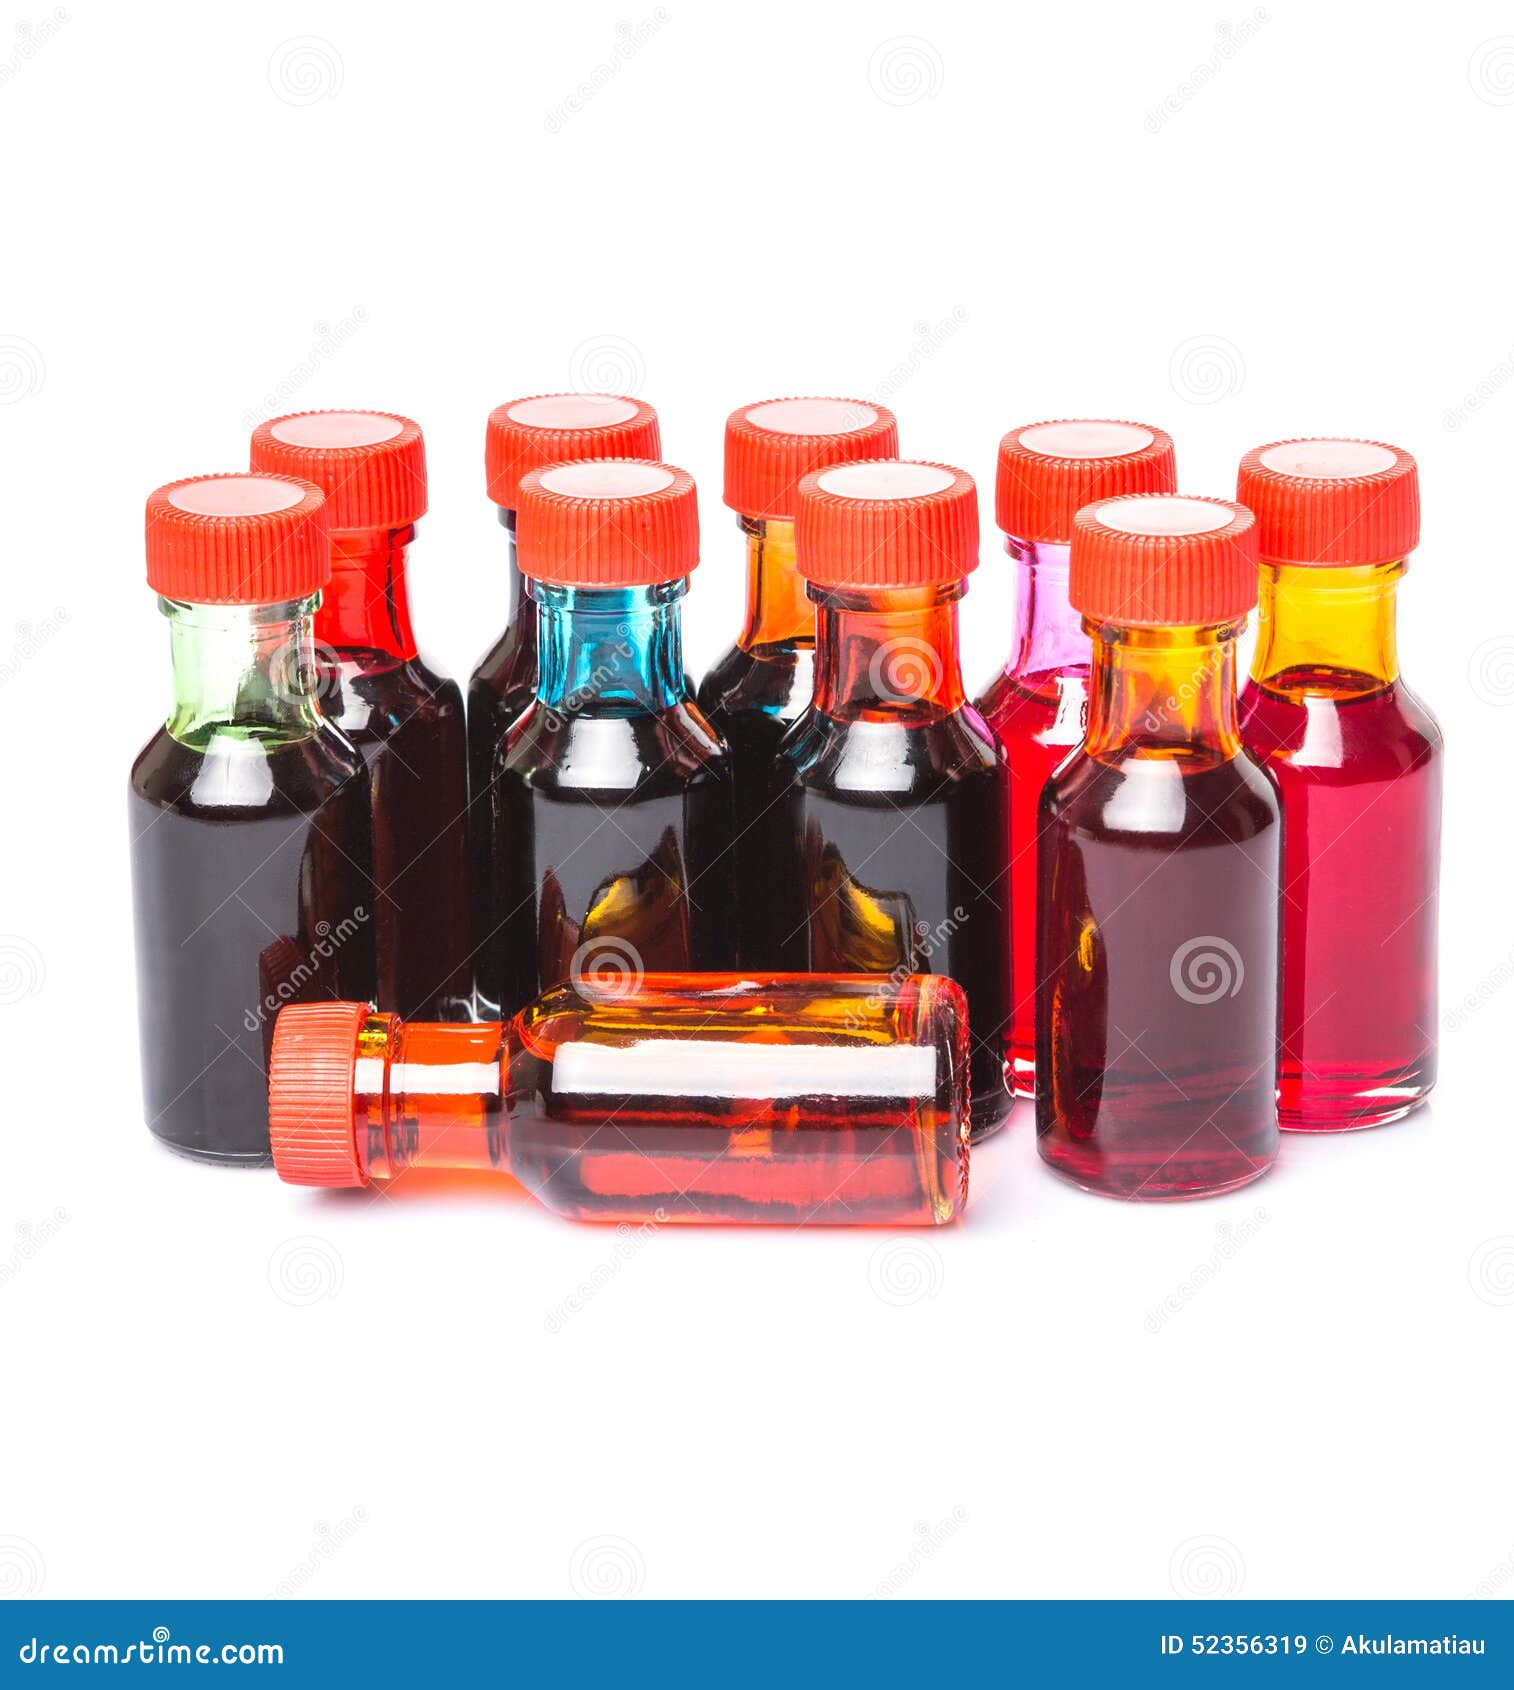 A Group of Food Color Additives I Stock Image - Image of decorate